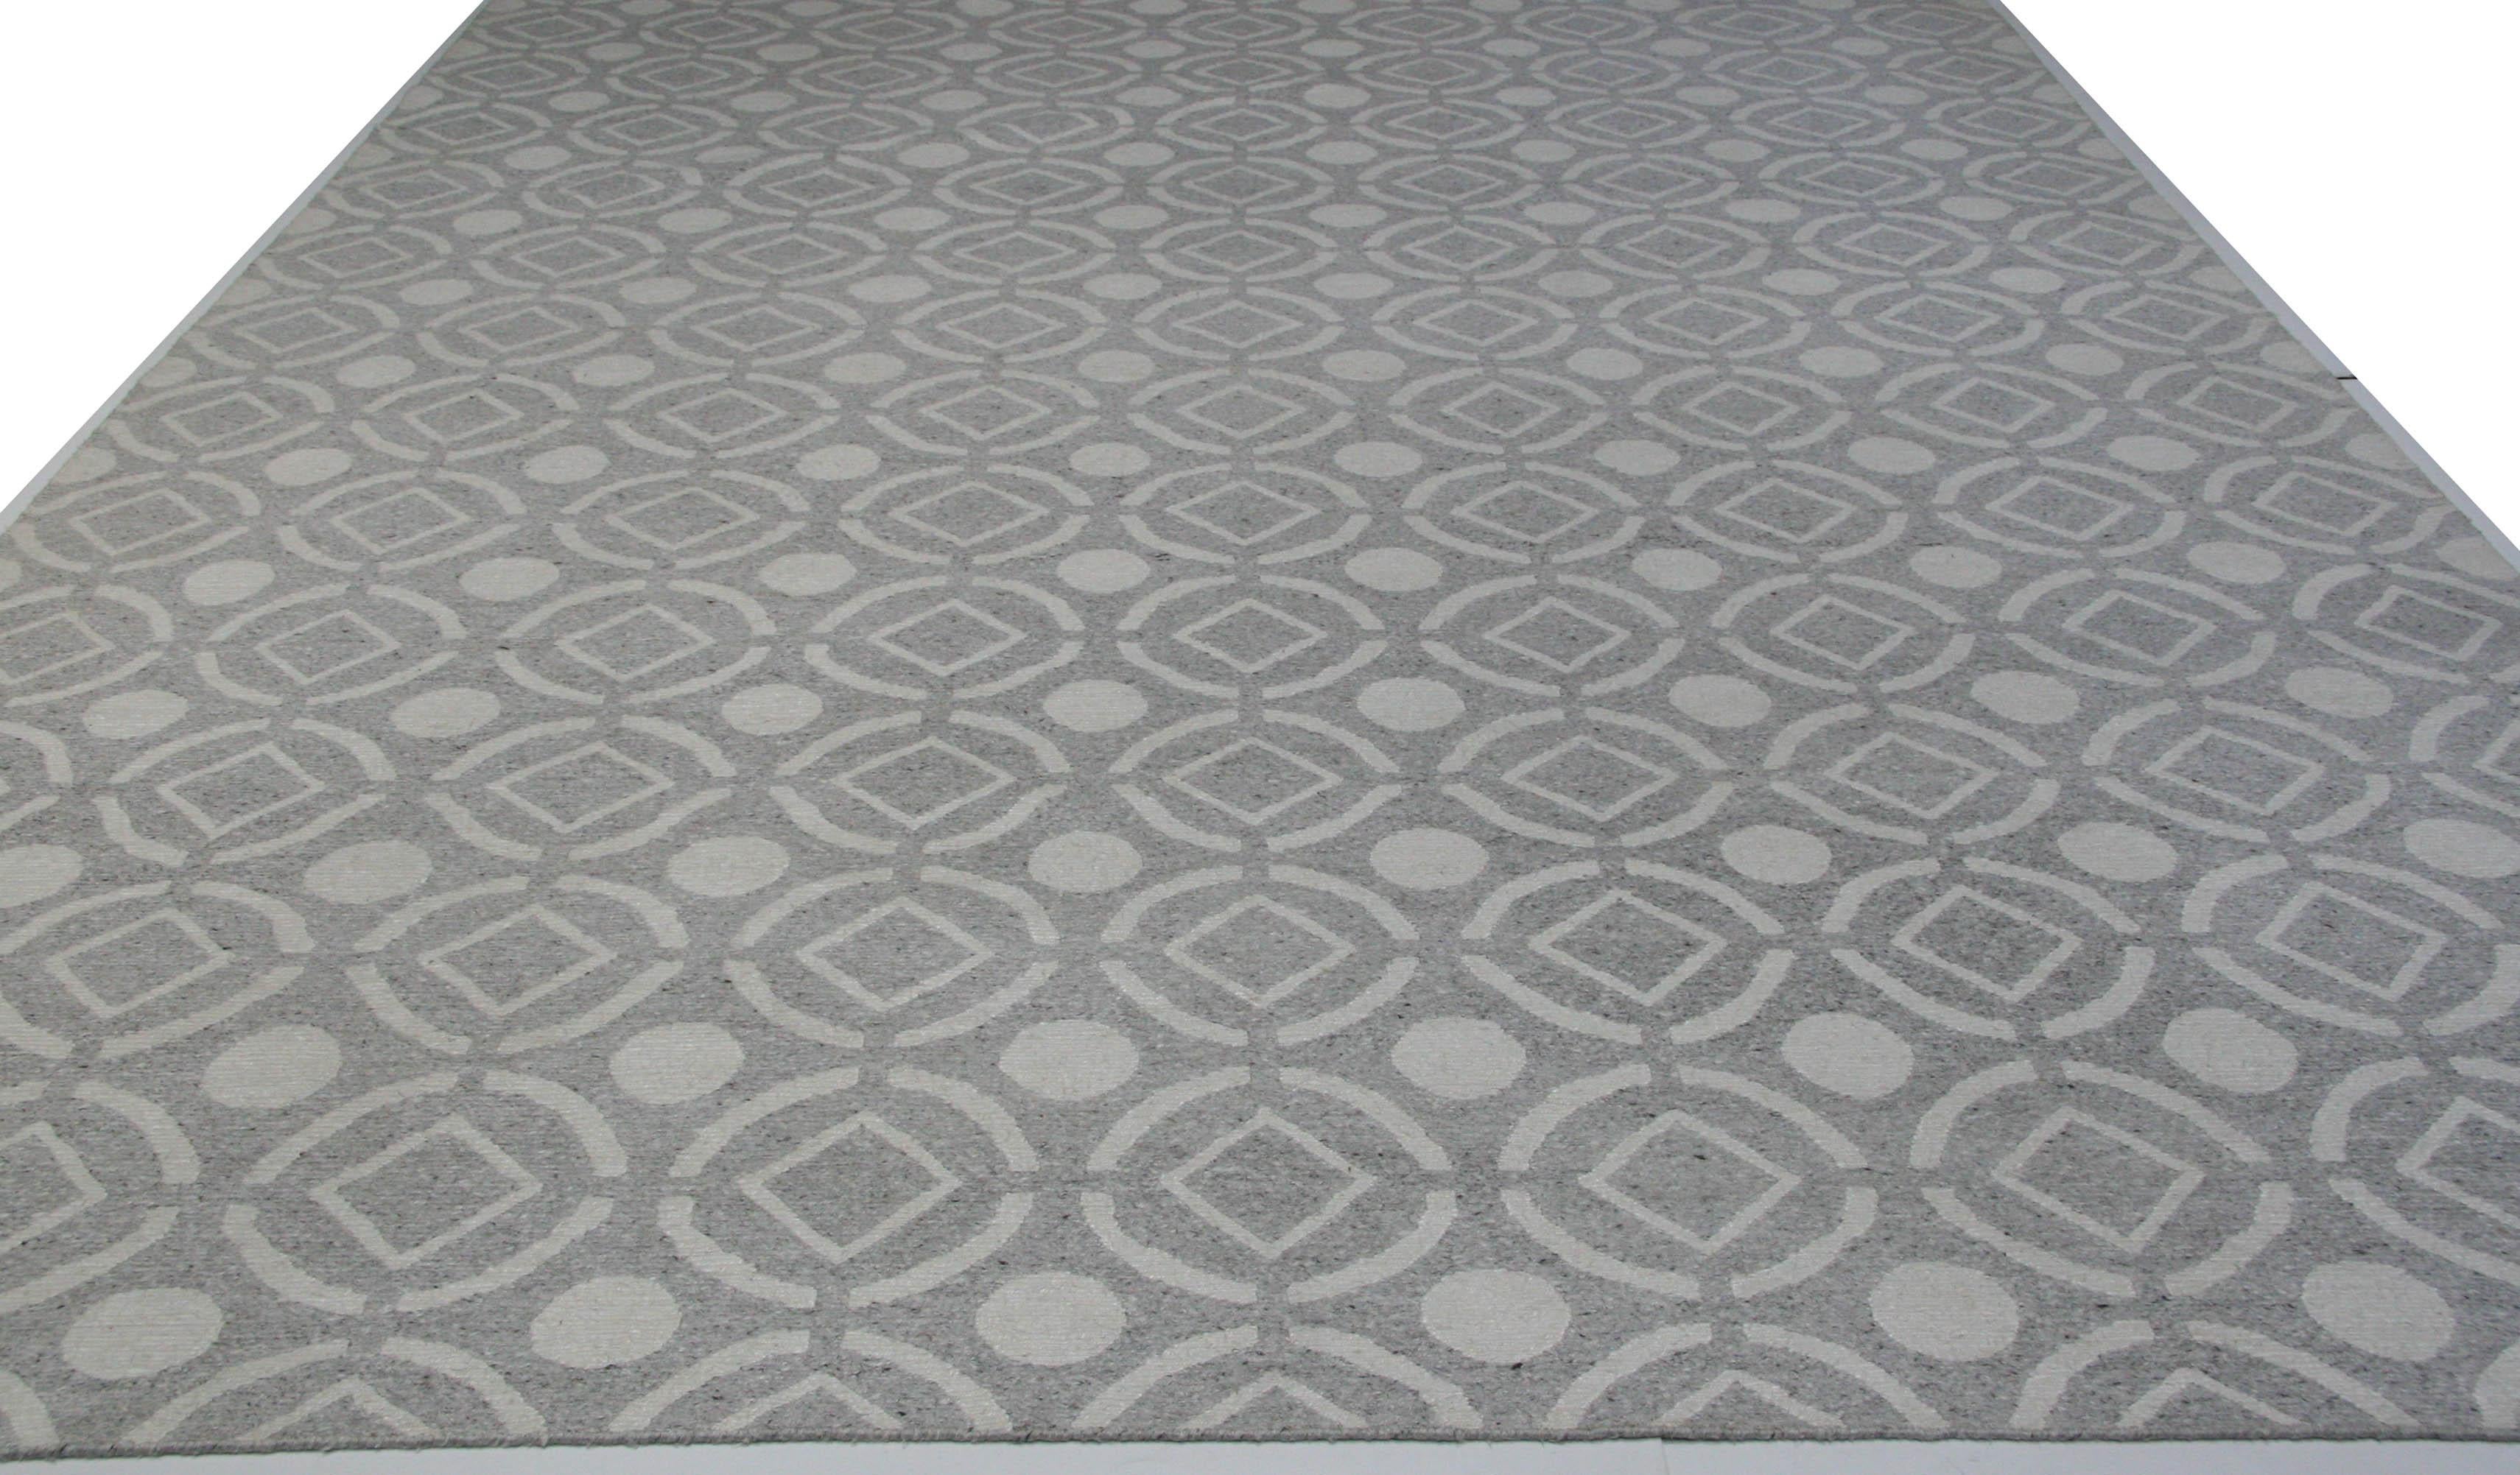 Gray and ivory combine in a pattern reminiscent of a cool tiled floor. The wool/viscose blend makes for durability and comfort underfoot. A great rug for the contemporary home or office. Hand knotted in India.